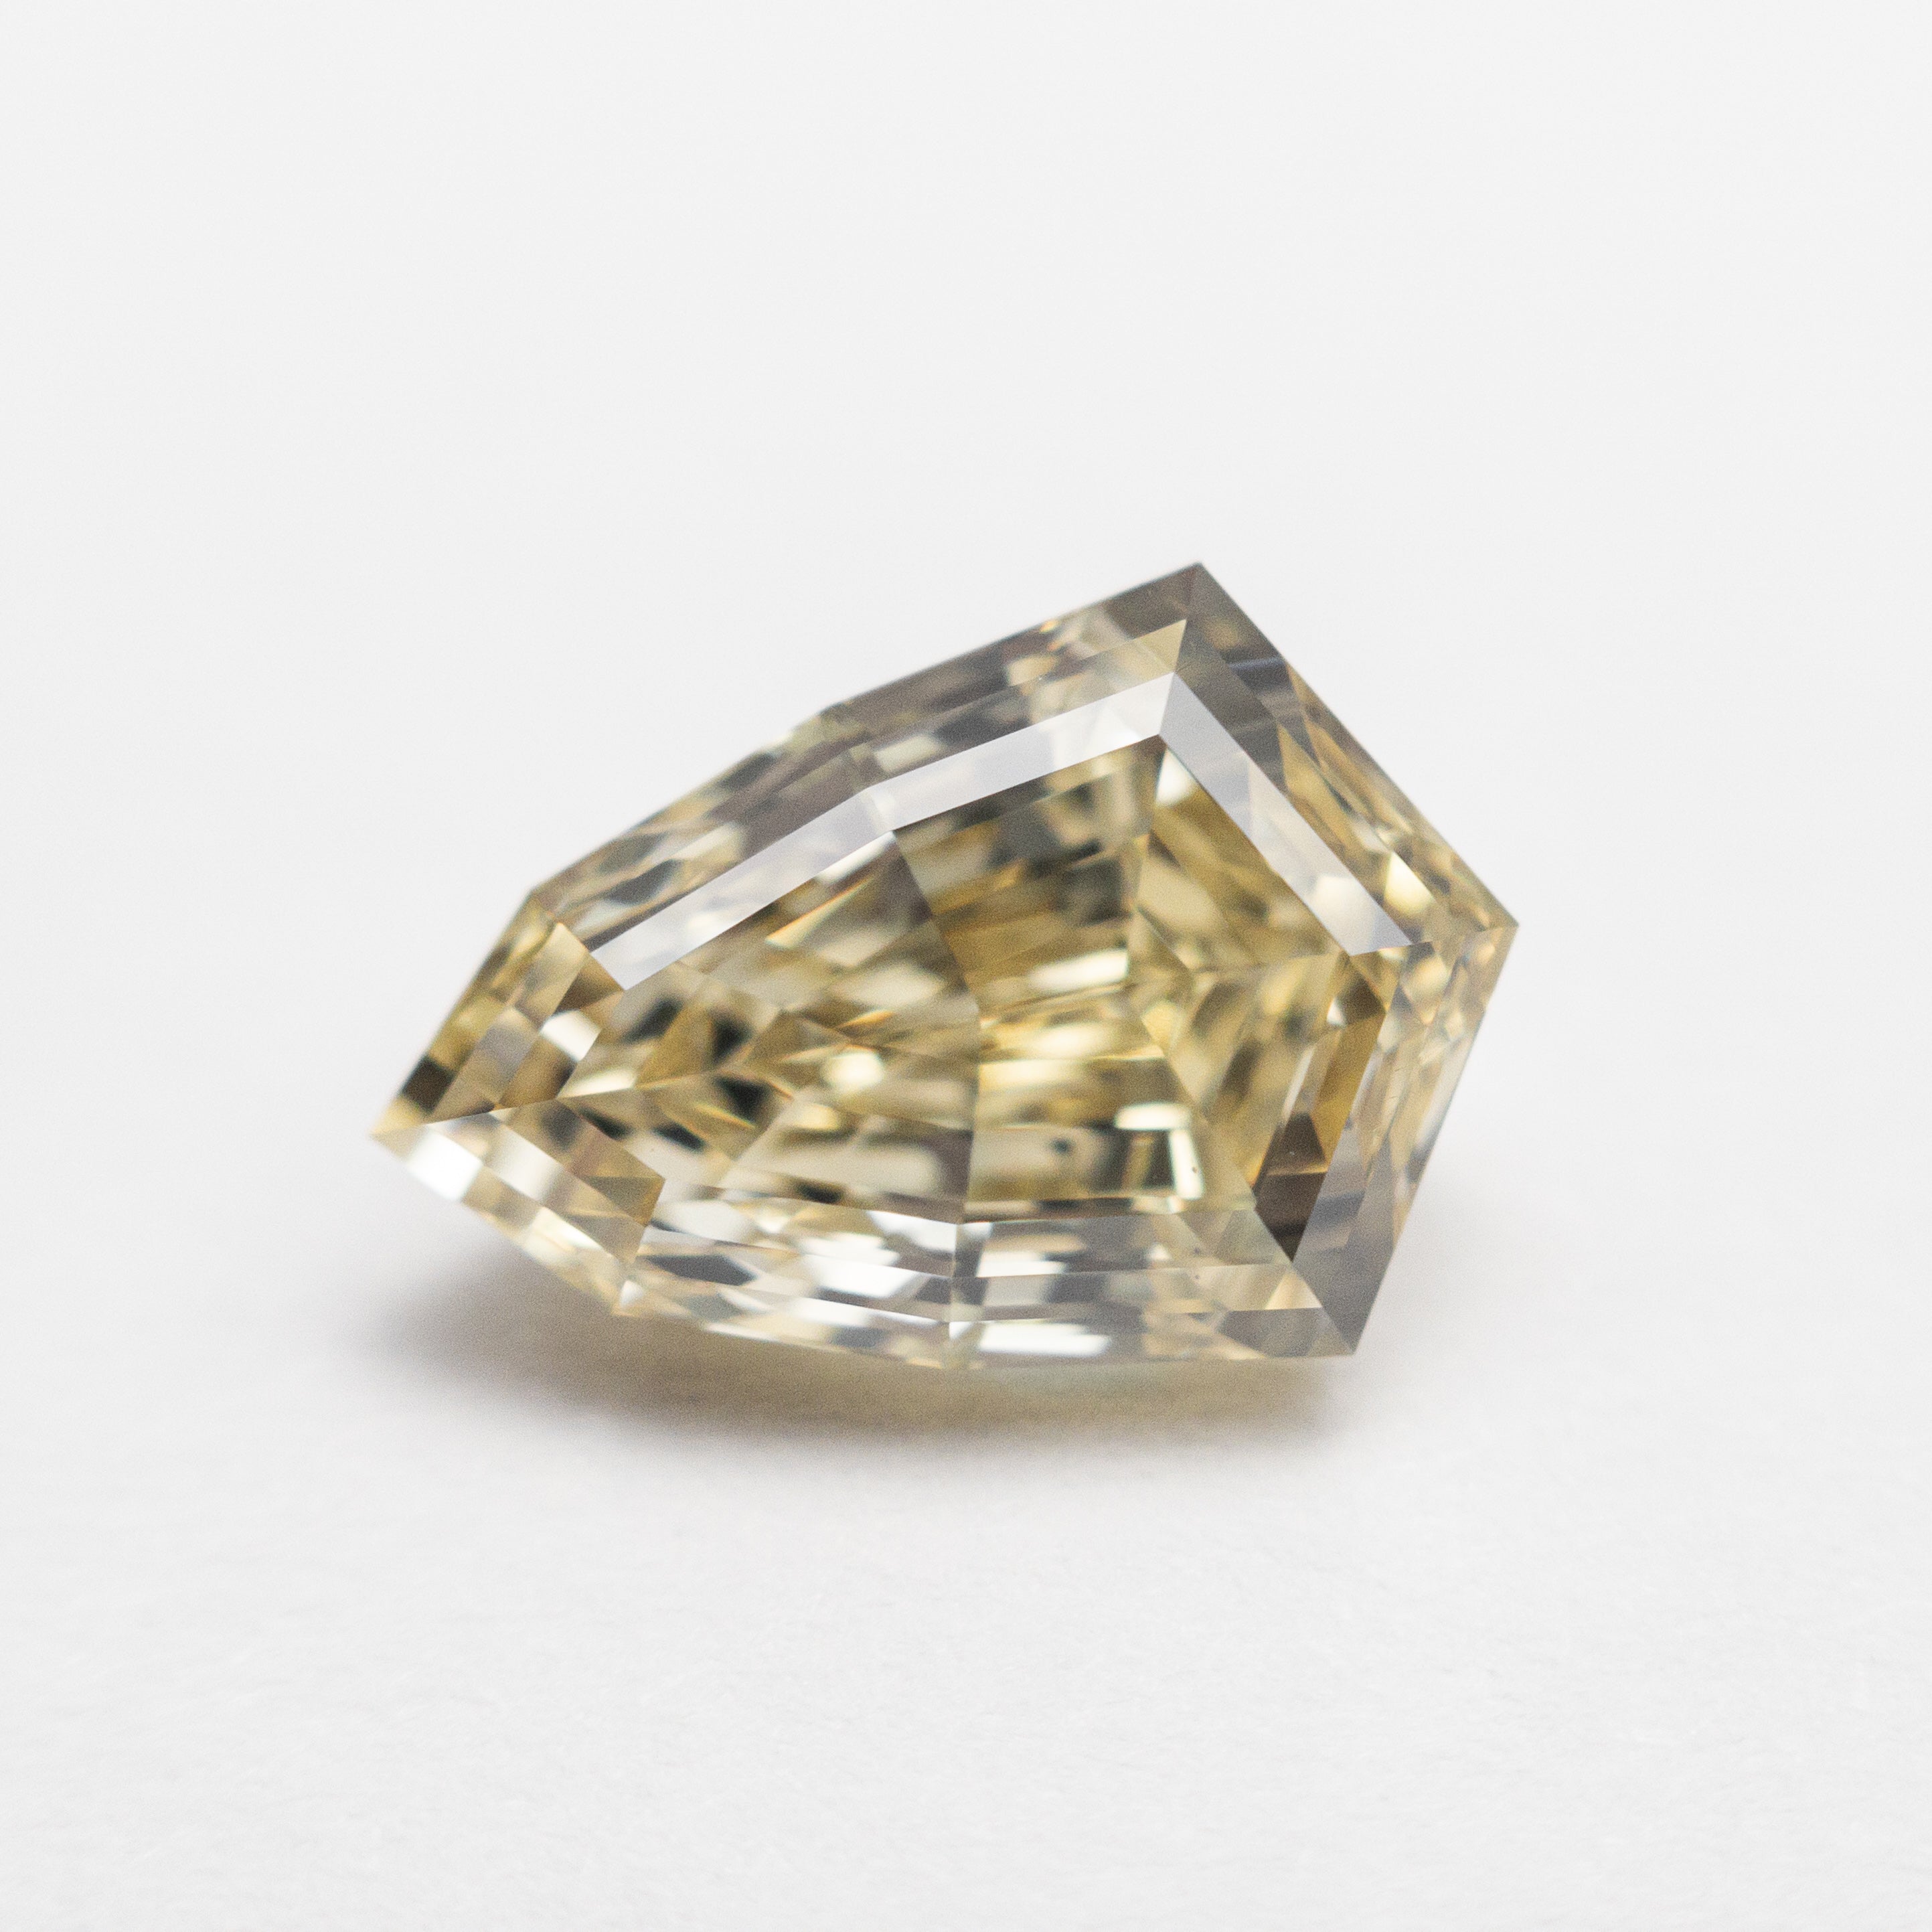 The 3.00ct 11.15x7.72x5.27mm VS1 Fancy Brownish Yellow Shield Step Cut 🇨🇦 21831-01 by East London jeweller Rachel Boston | Discover our collections of unique and timeless engagement rings, wedding rings, and modern fine jewellery.